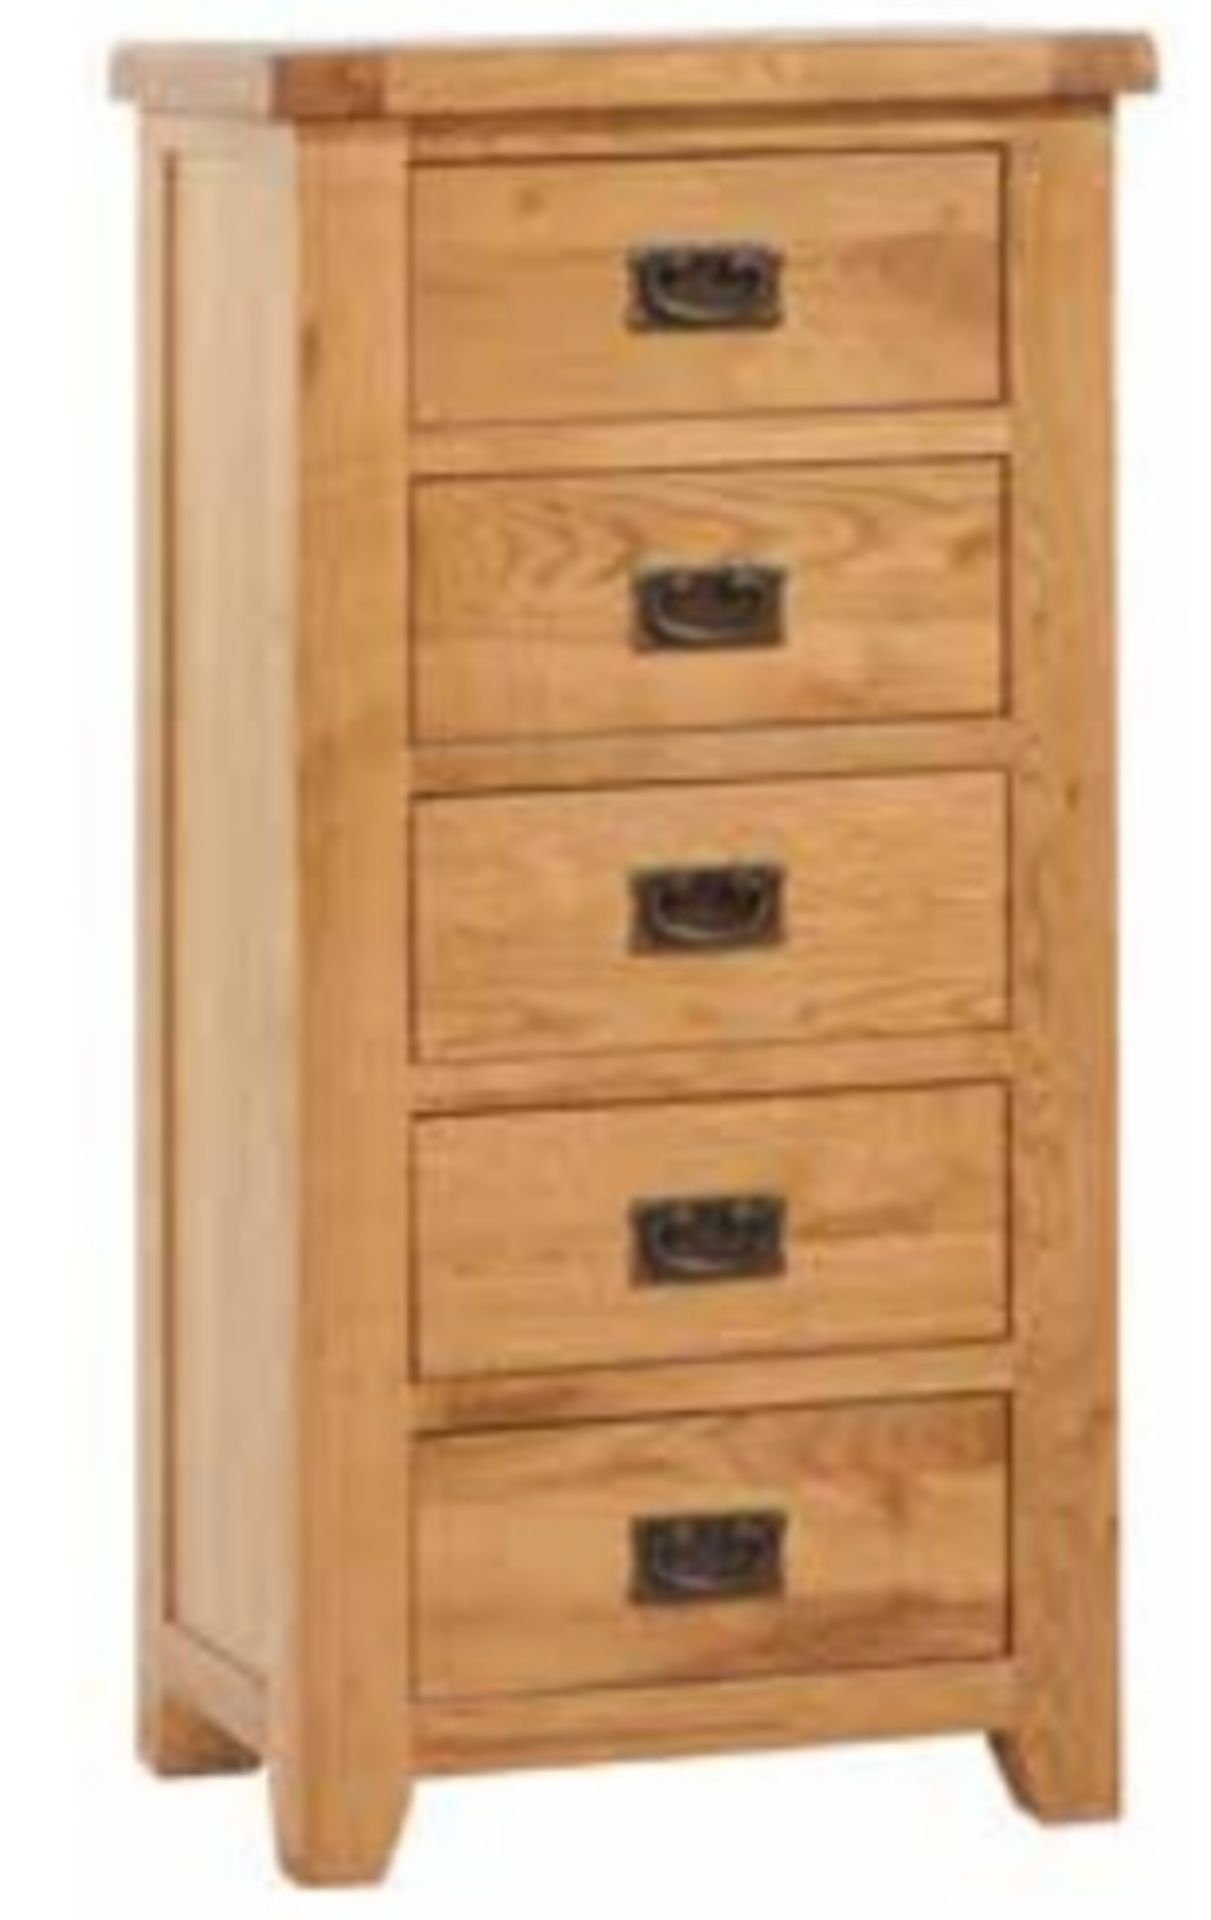 V Brand New Chiswick Oak Tall chest with 5 drawers 55w x 40d x 110h cms ISP £199.00 (thehomemill.